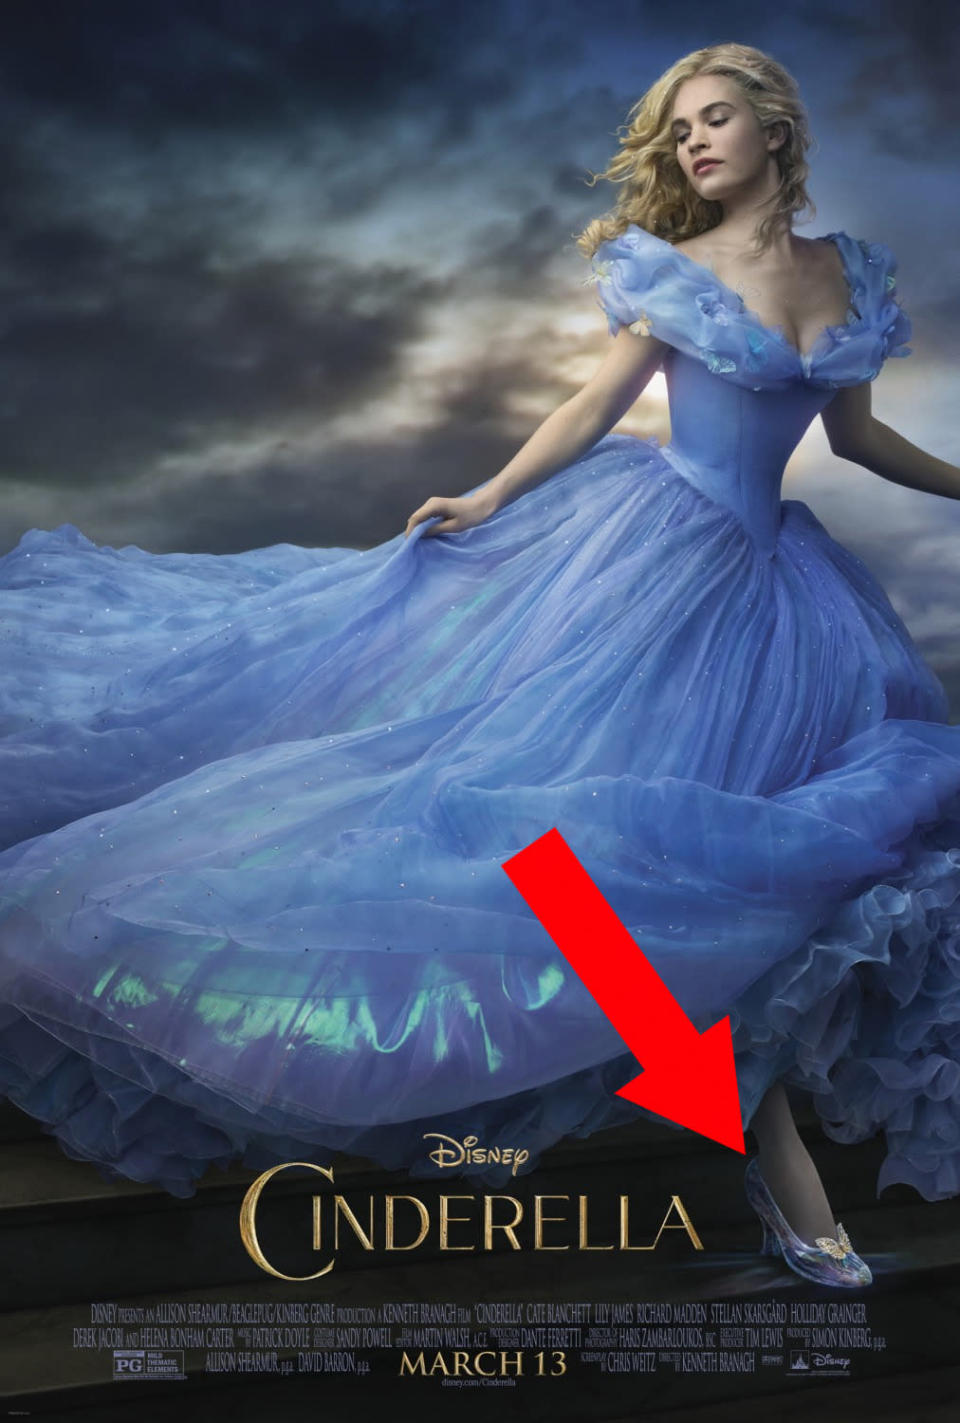 Cinderella: It was much noted on its release how Kenneth Branagh’s Cinderella (played by ‘Downton’s Lily James) seemed impossibly thin around the waist. This poster accentuates it, but oddly, gives her a massive foot too.